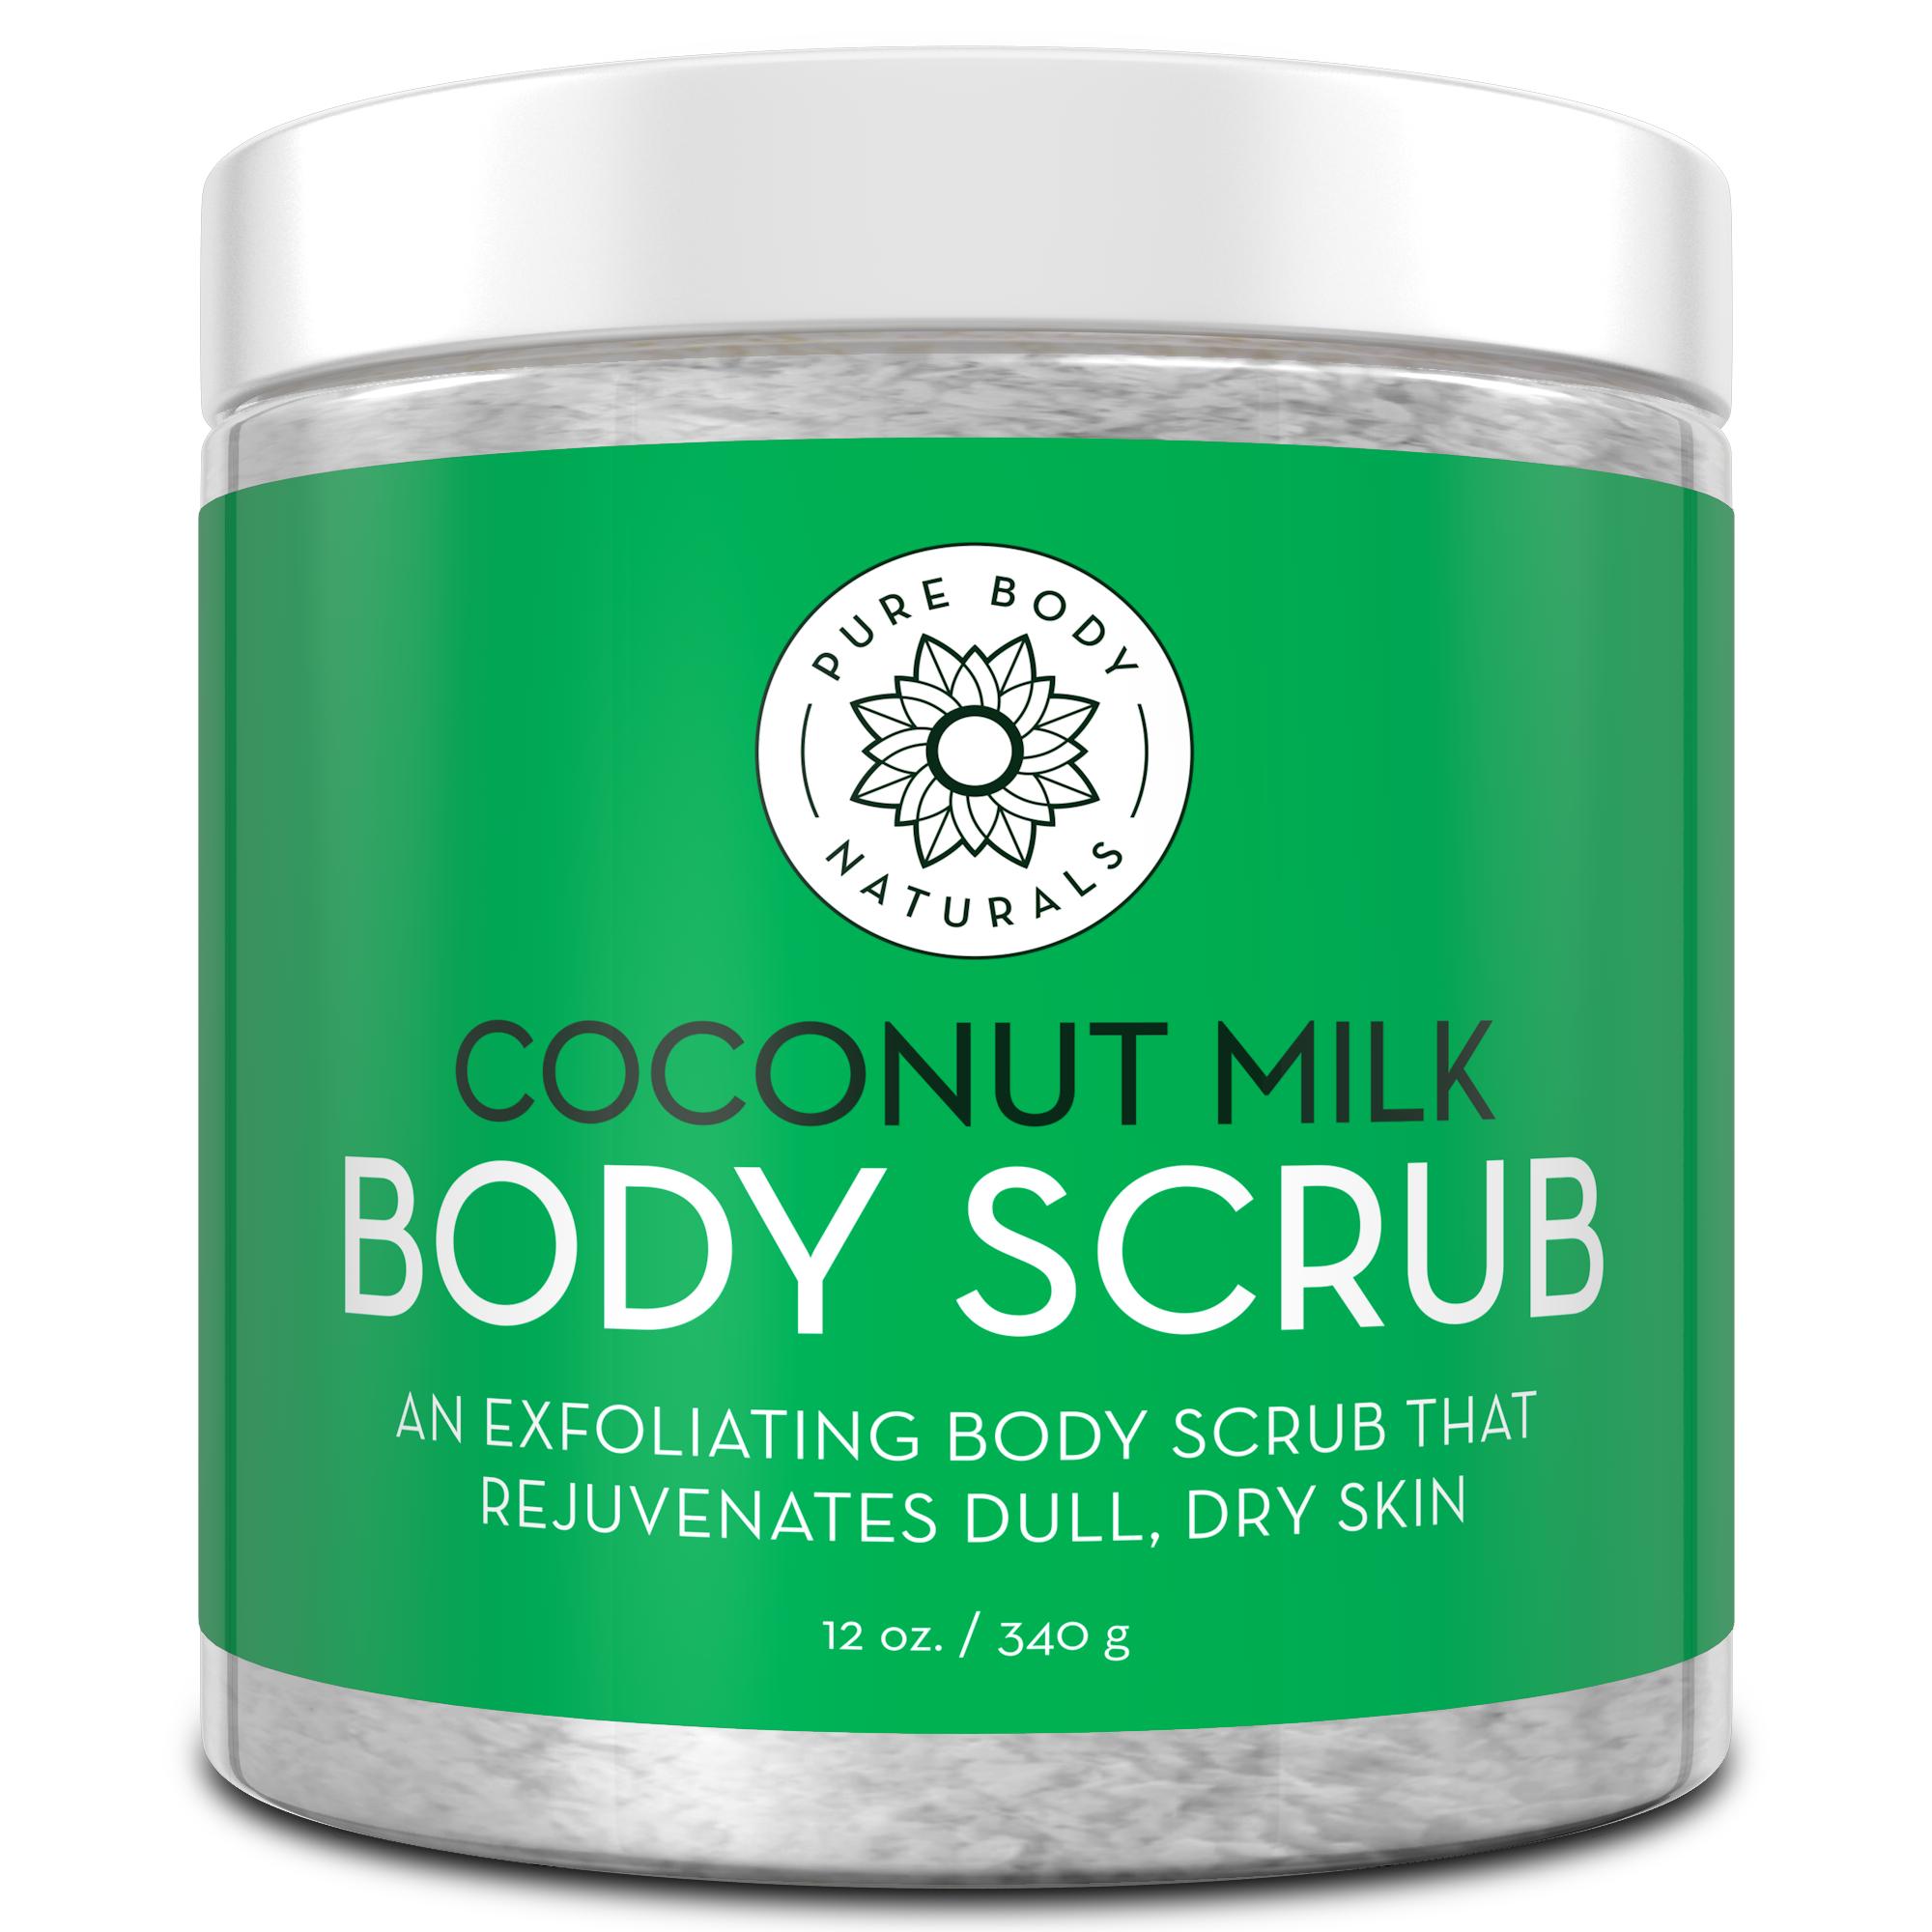  Exfoliating Body Scrub - Pure Dead Sea Salt Scrub for Hands  and Body, 16 fl oz Hydrating Moisturizing Skin Care for Body Acne, Wrinkles  (Coconut) : Beauty & Personal Care